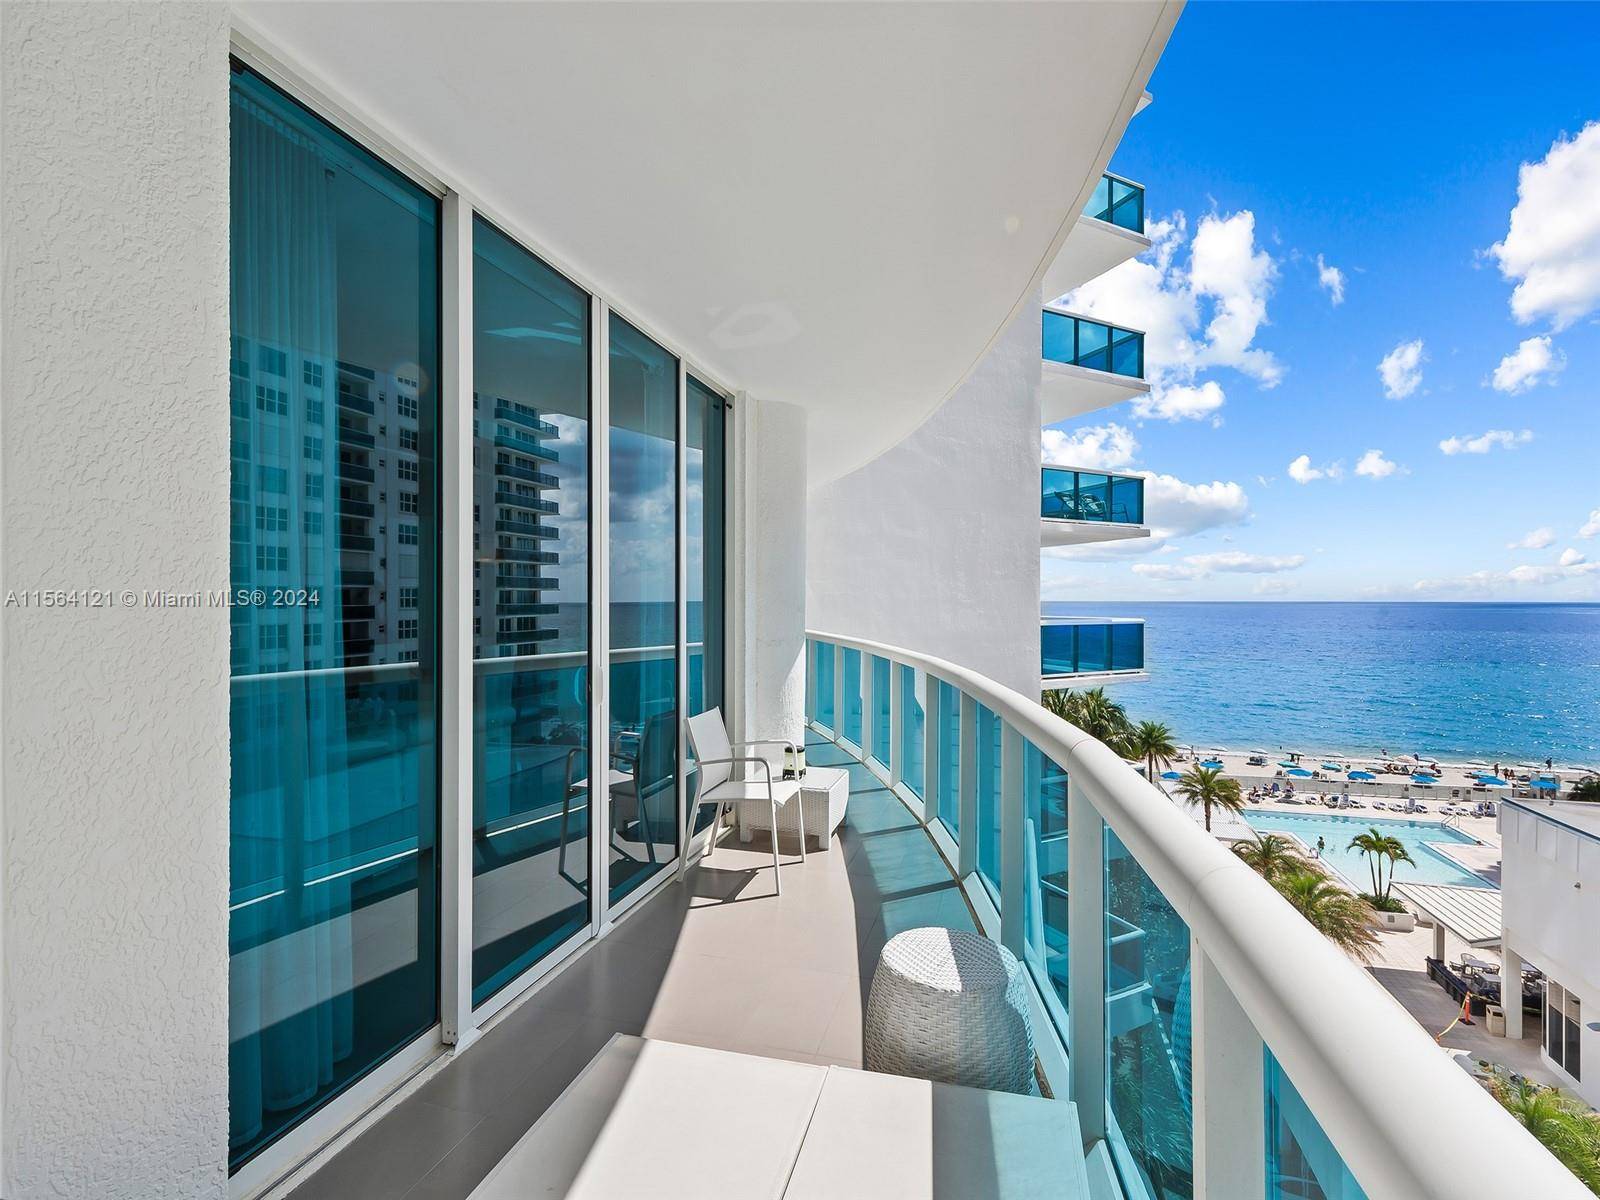 This is an opportunity to rent in a beautiful oceanfront building with 5 star amenities.